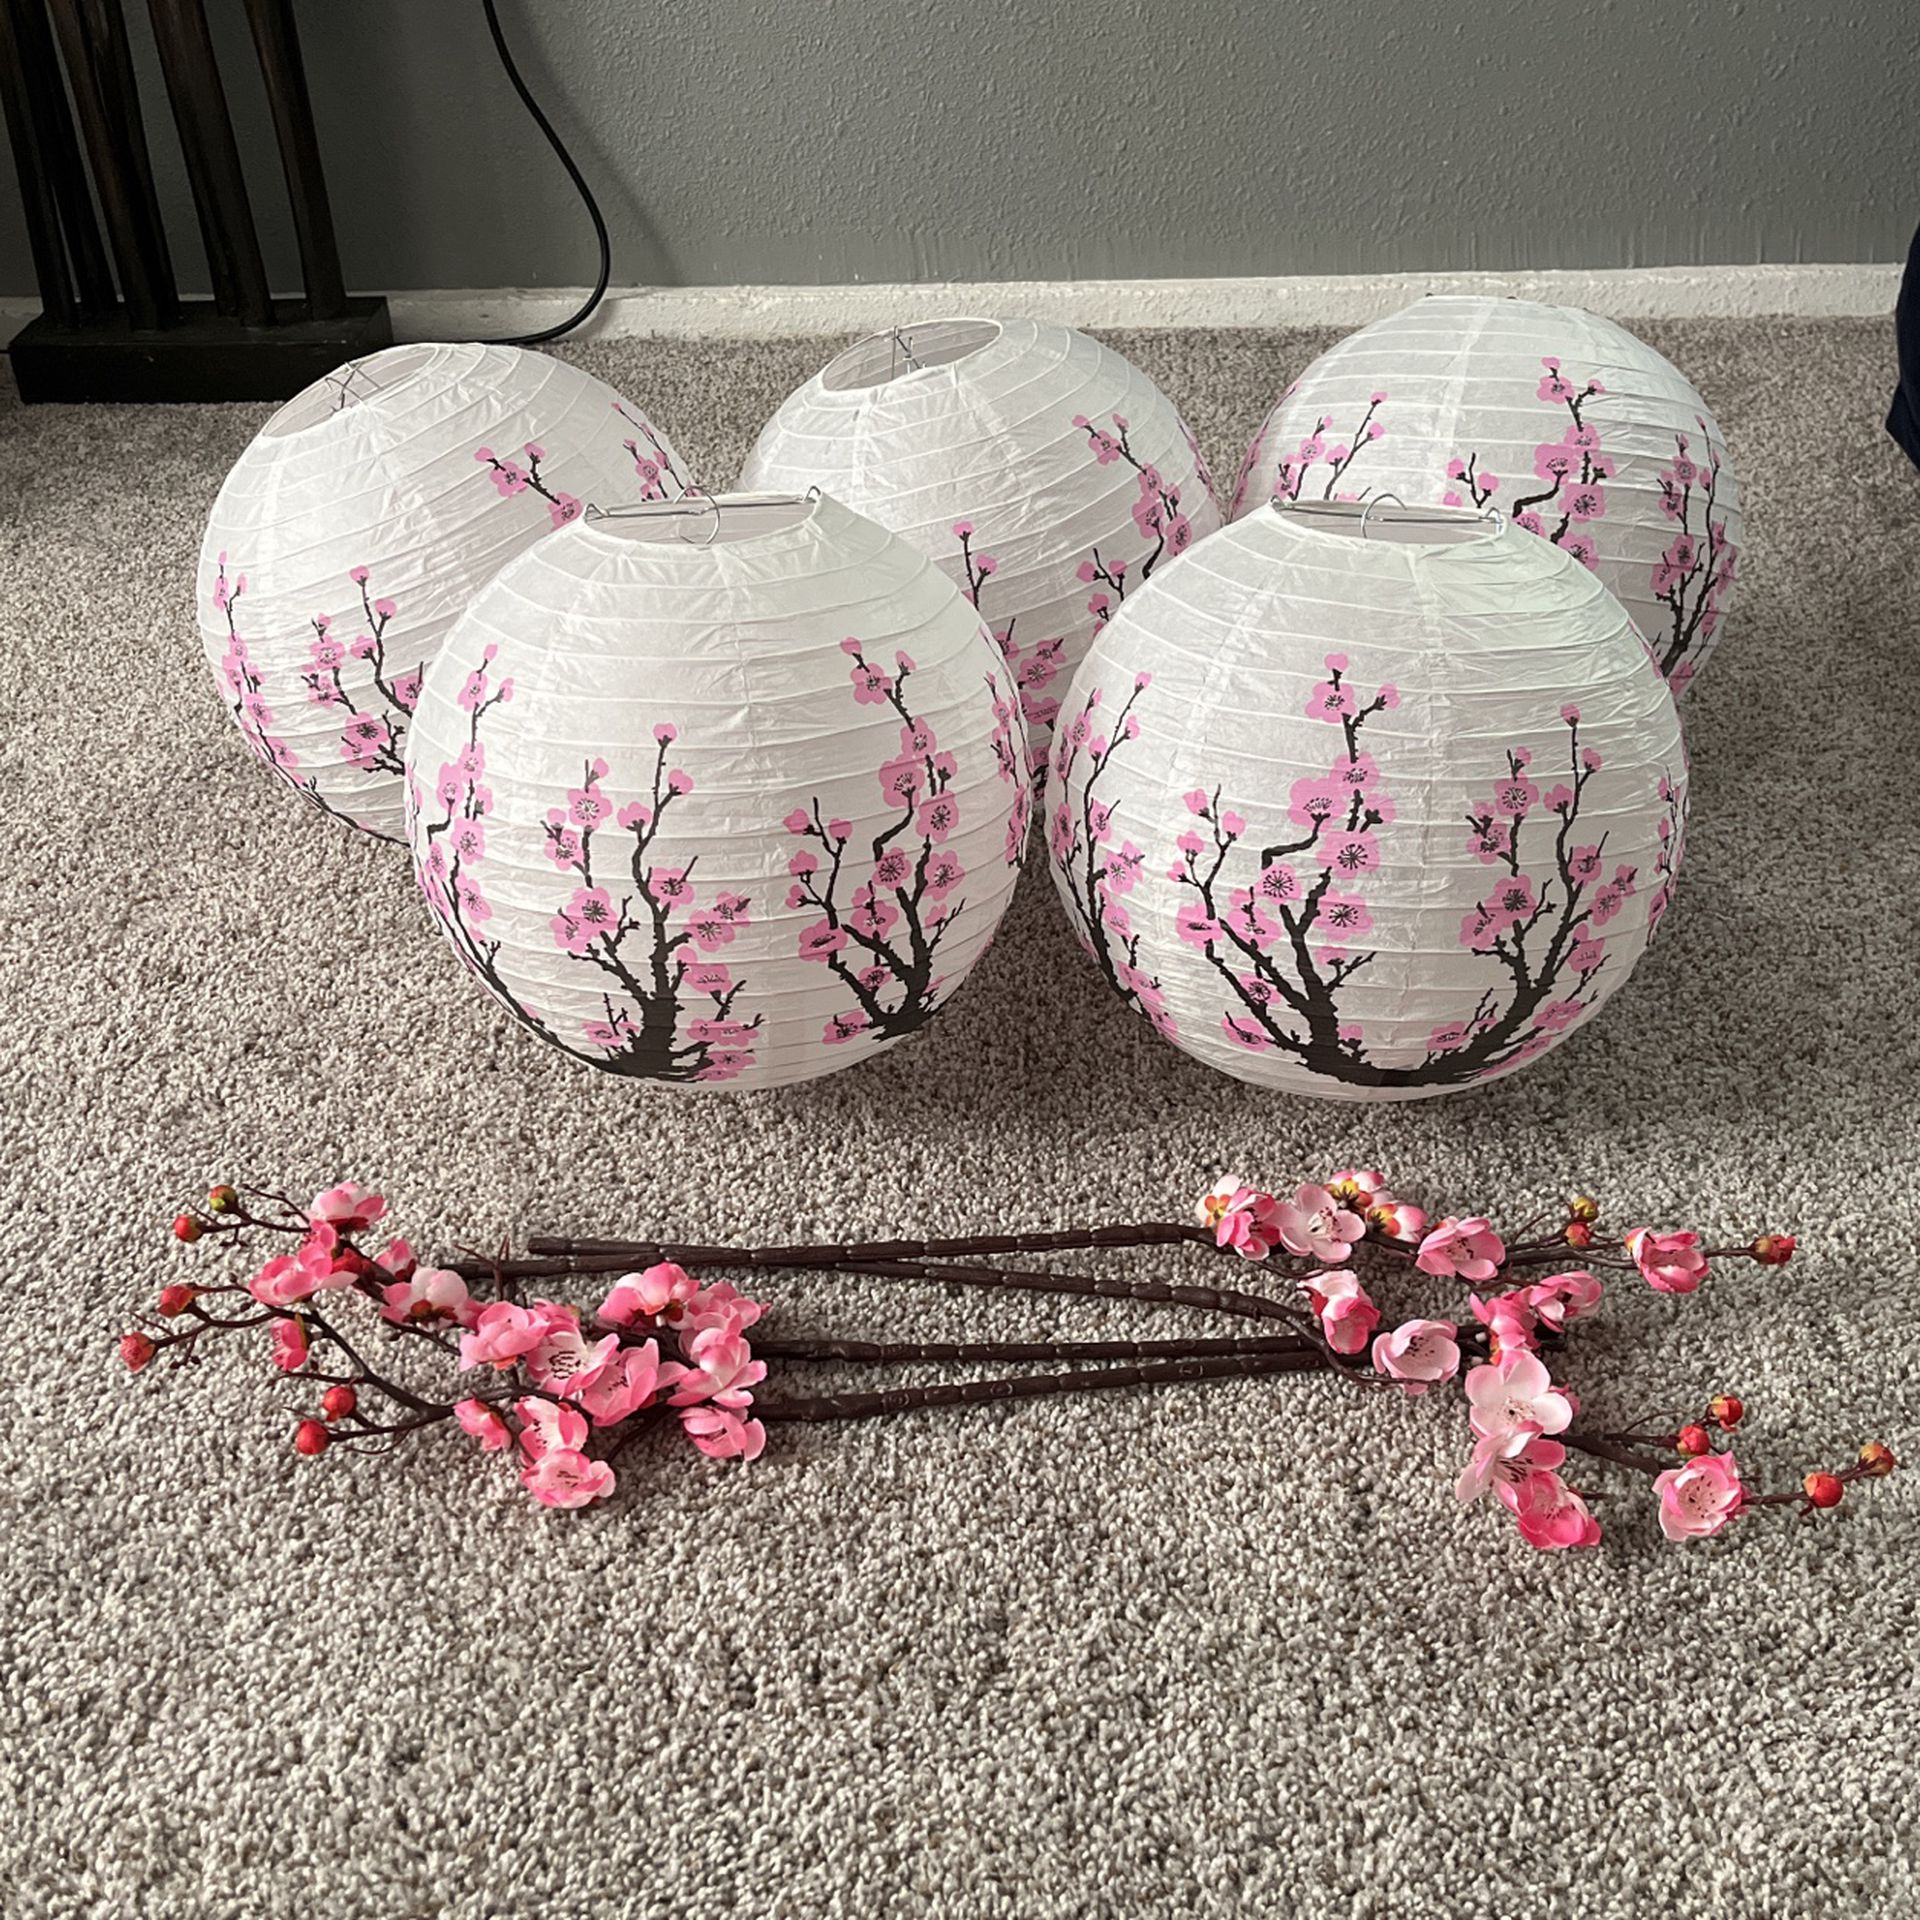 Free Cherry Blossoms Decorations Party Theme